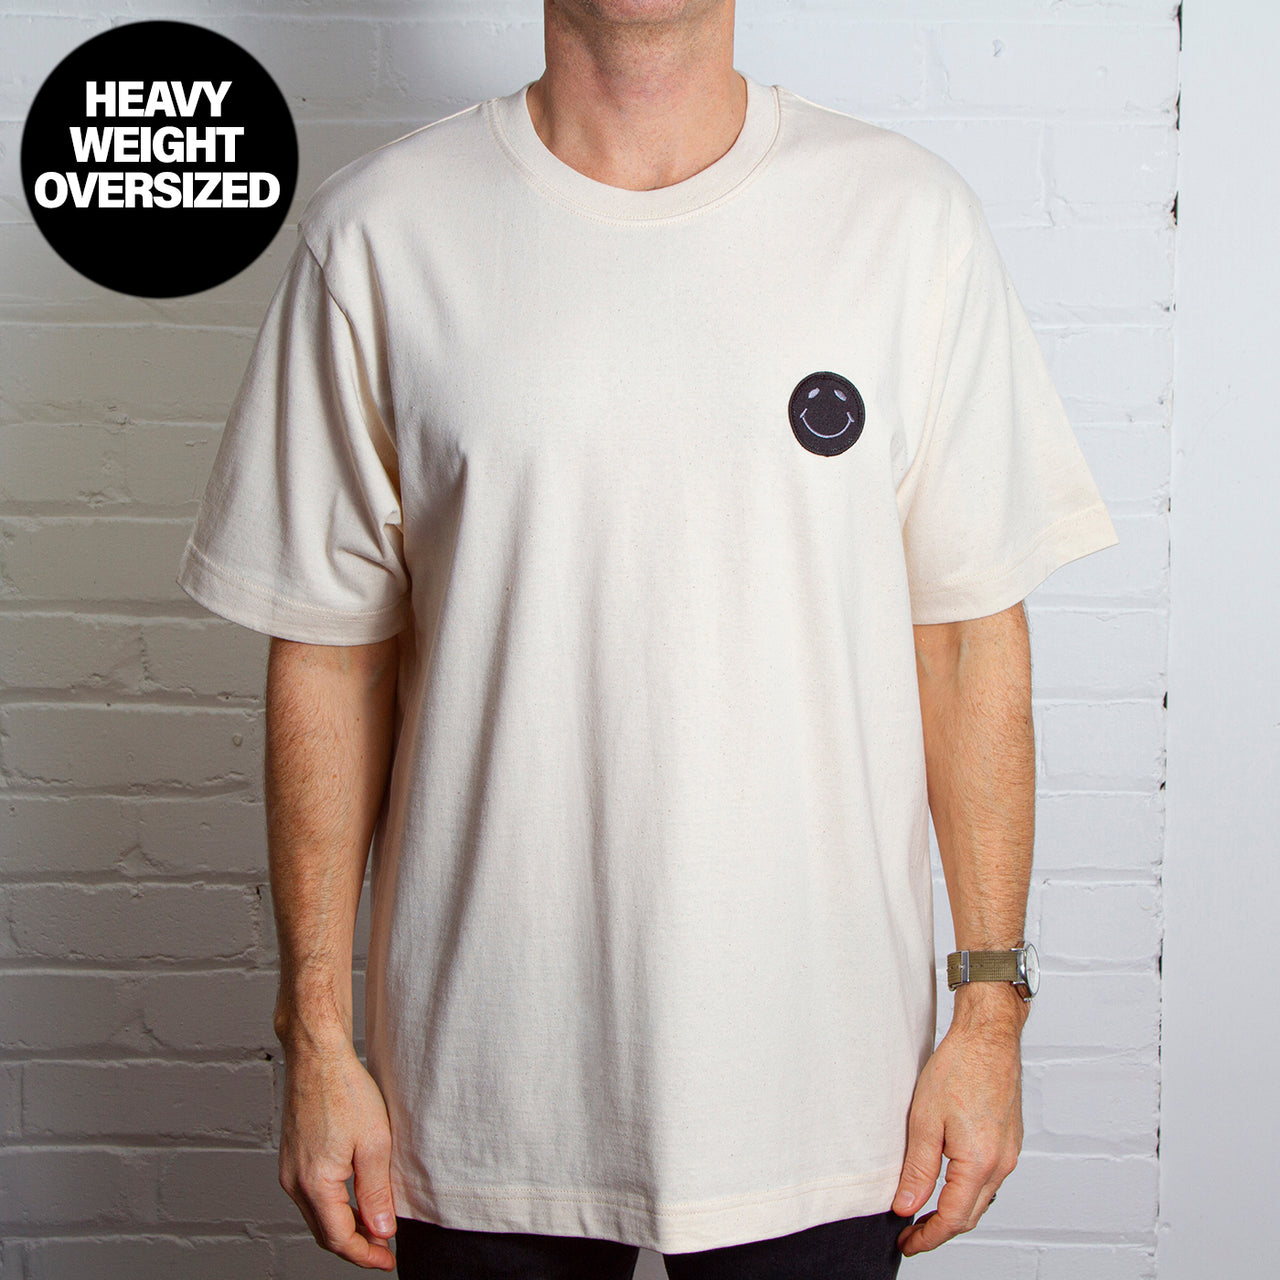 BB Smiley Crest  - Heavyweight Oversized Tshirt - Natural Raw